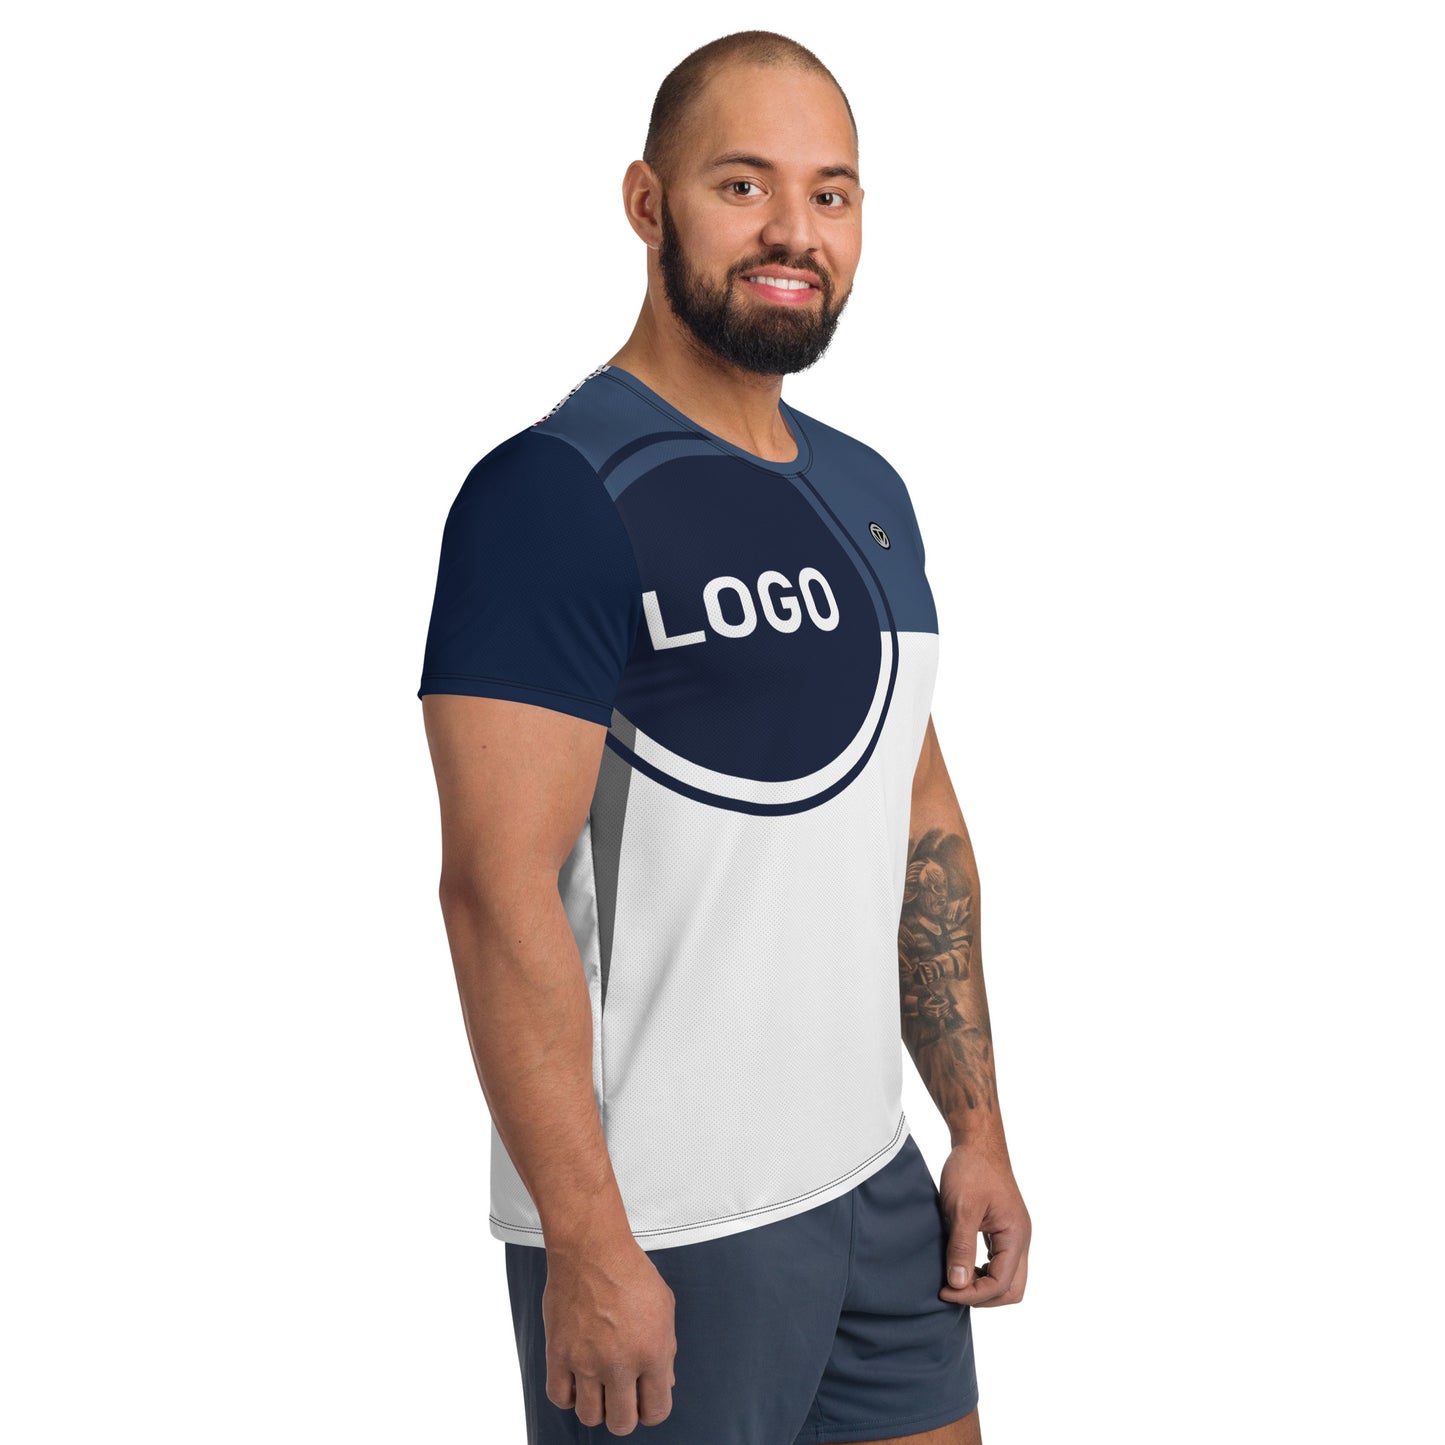 TIME OF VIBES - Men's Athletic T-shirt CORPORATE - €49.00